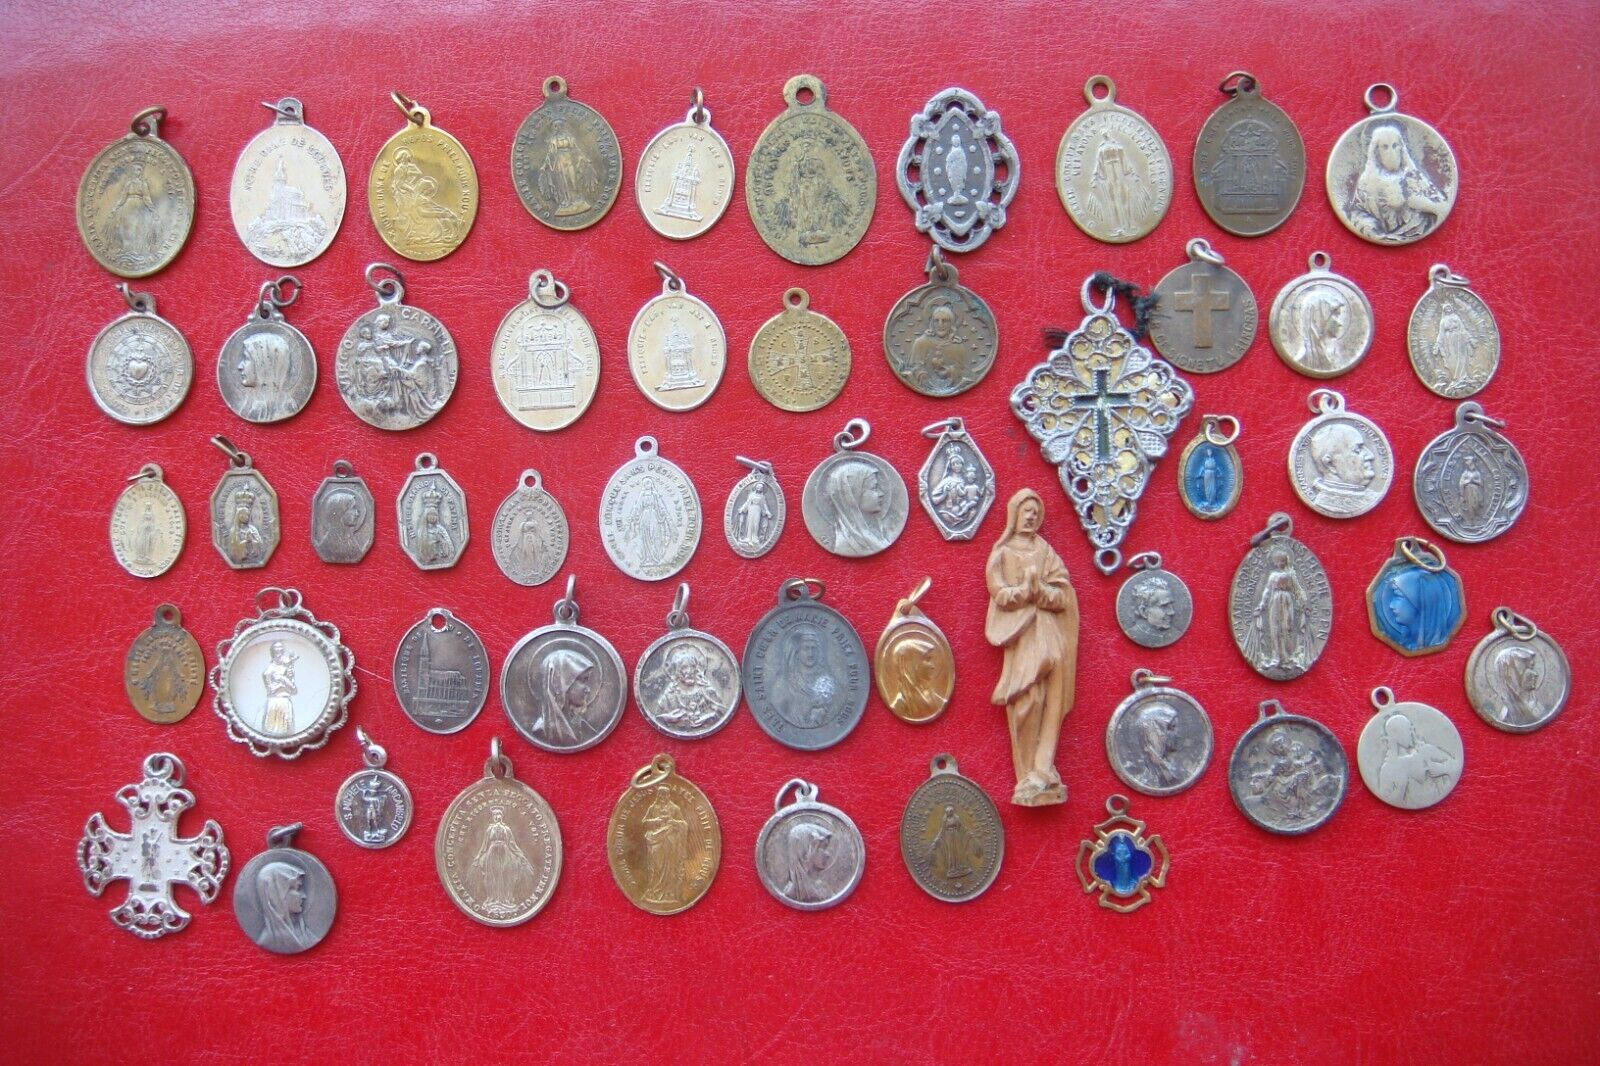 LOT OF 56 PCS DIFFERENT SAINTS ANTIQUE RELIGIOUS BEAUTIFULLY DETAILED RARE MEDAL